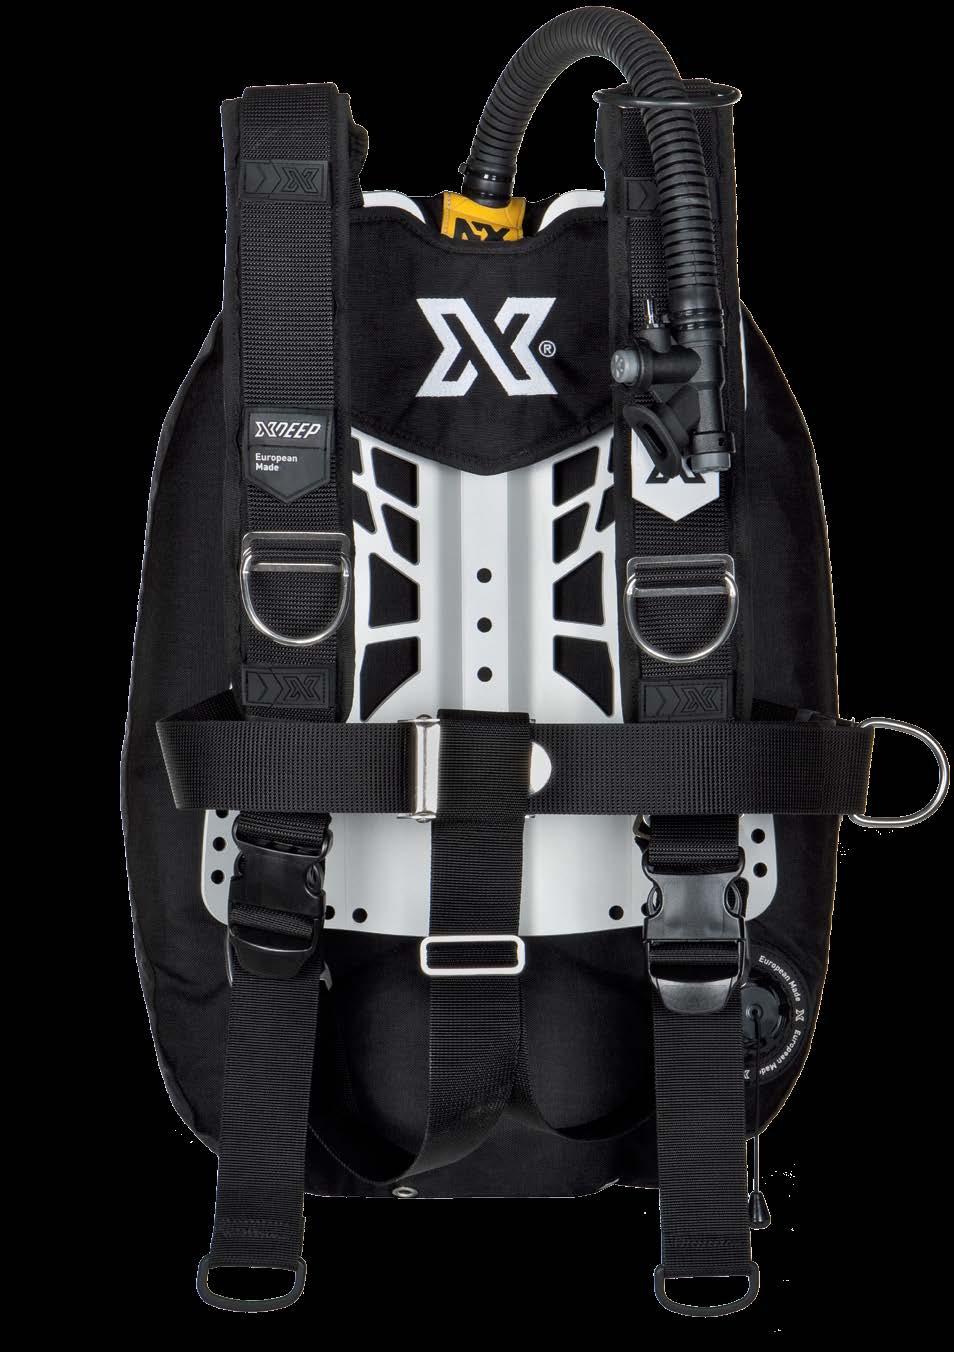 KROK 01 In the harness with quick-adjustment buckle you adjust the strap by pulling loose ends of the shoulder straps (tightening) or by bending the press of the buckle up (loosening).